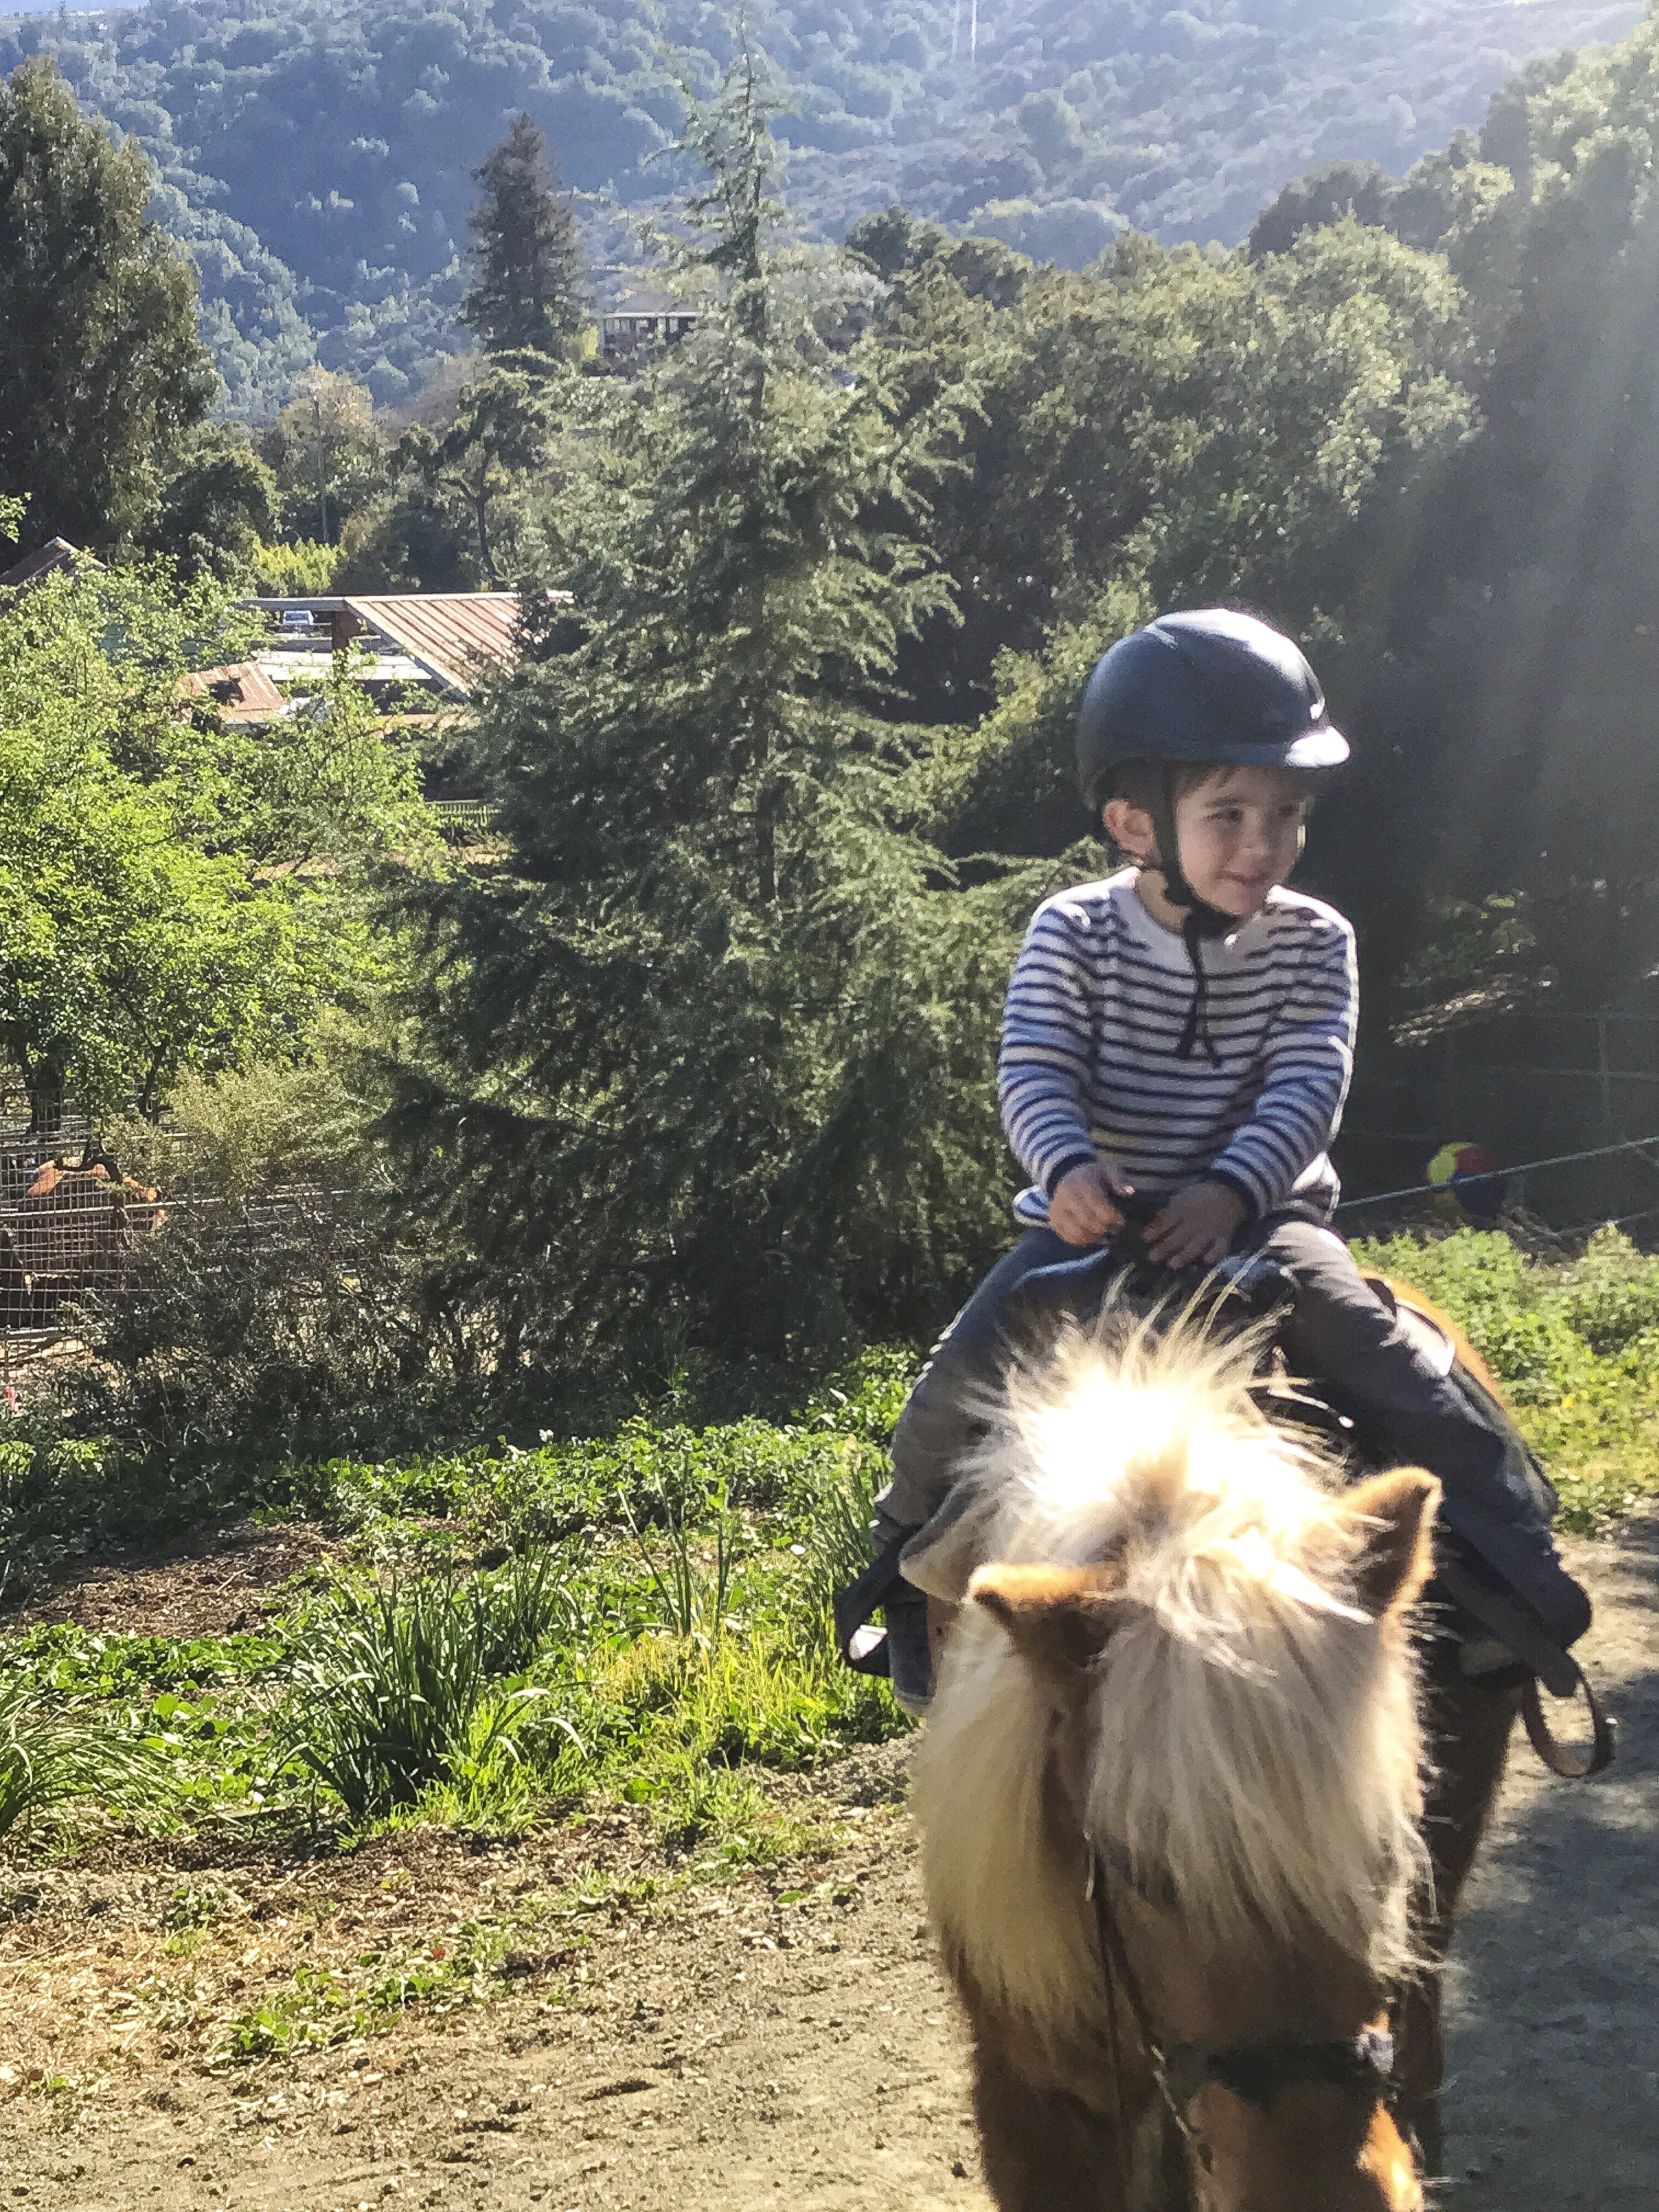 Ultimate List of Kid-Friendly Wineries near San Francisco | San Francisco with Kids | Family Friendly Wineries | Henry and Andrew’s Guide (www.henryandandrewsguide.com) 